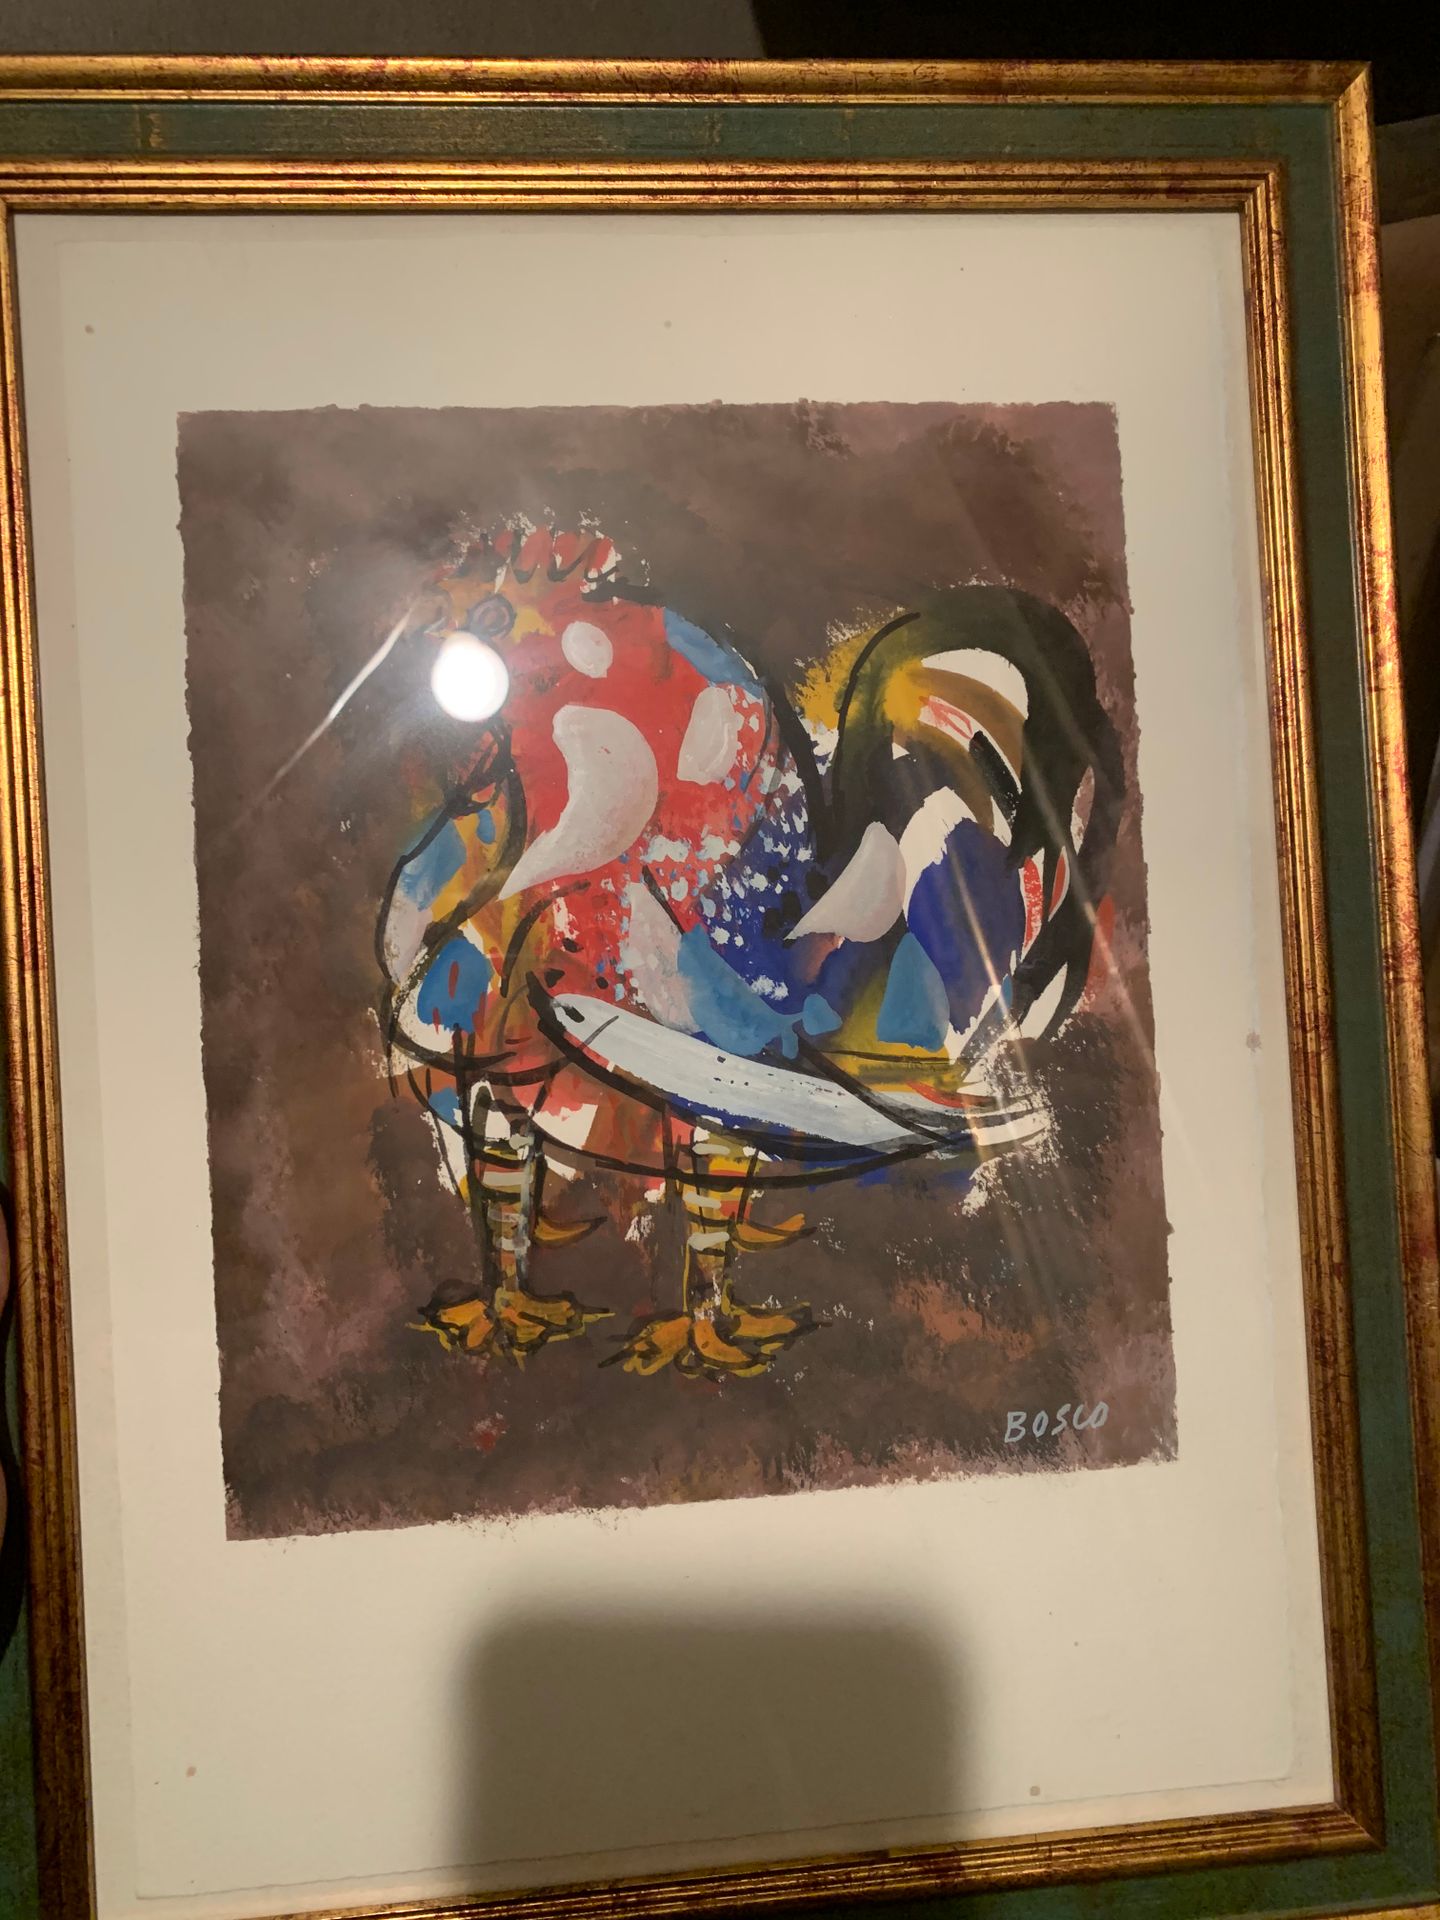 Null Pierre BOSCO (1909-1993)

Rooster

Gouache on paper signed lower right

39 &hellip;